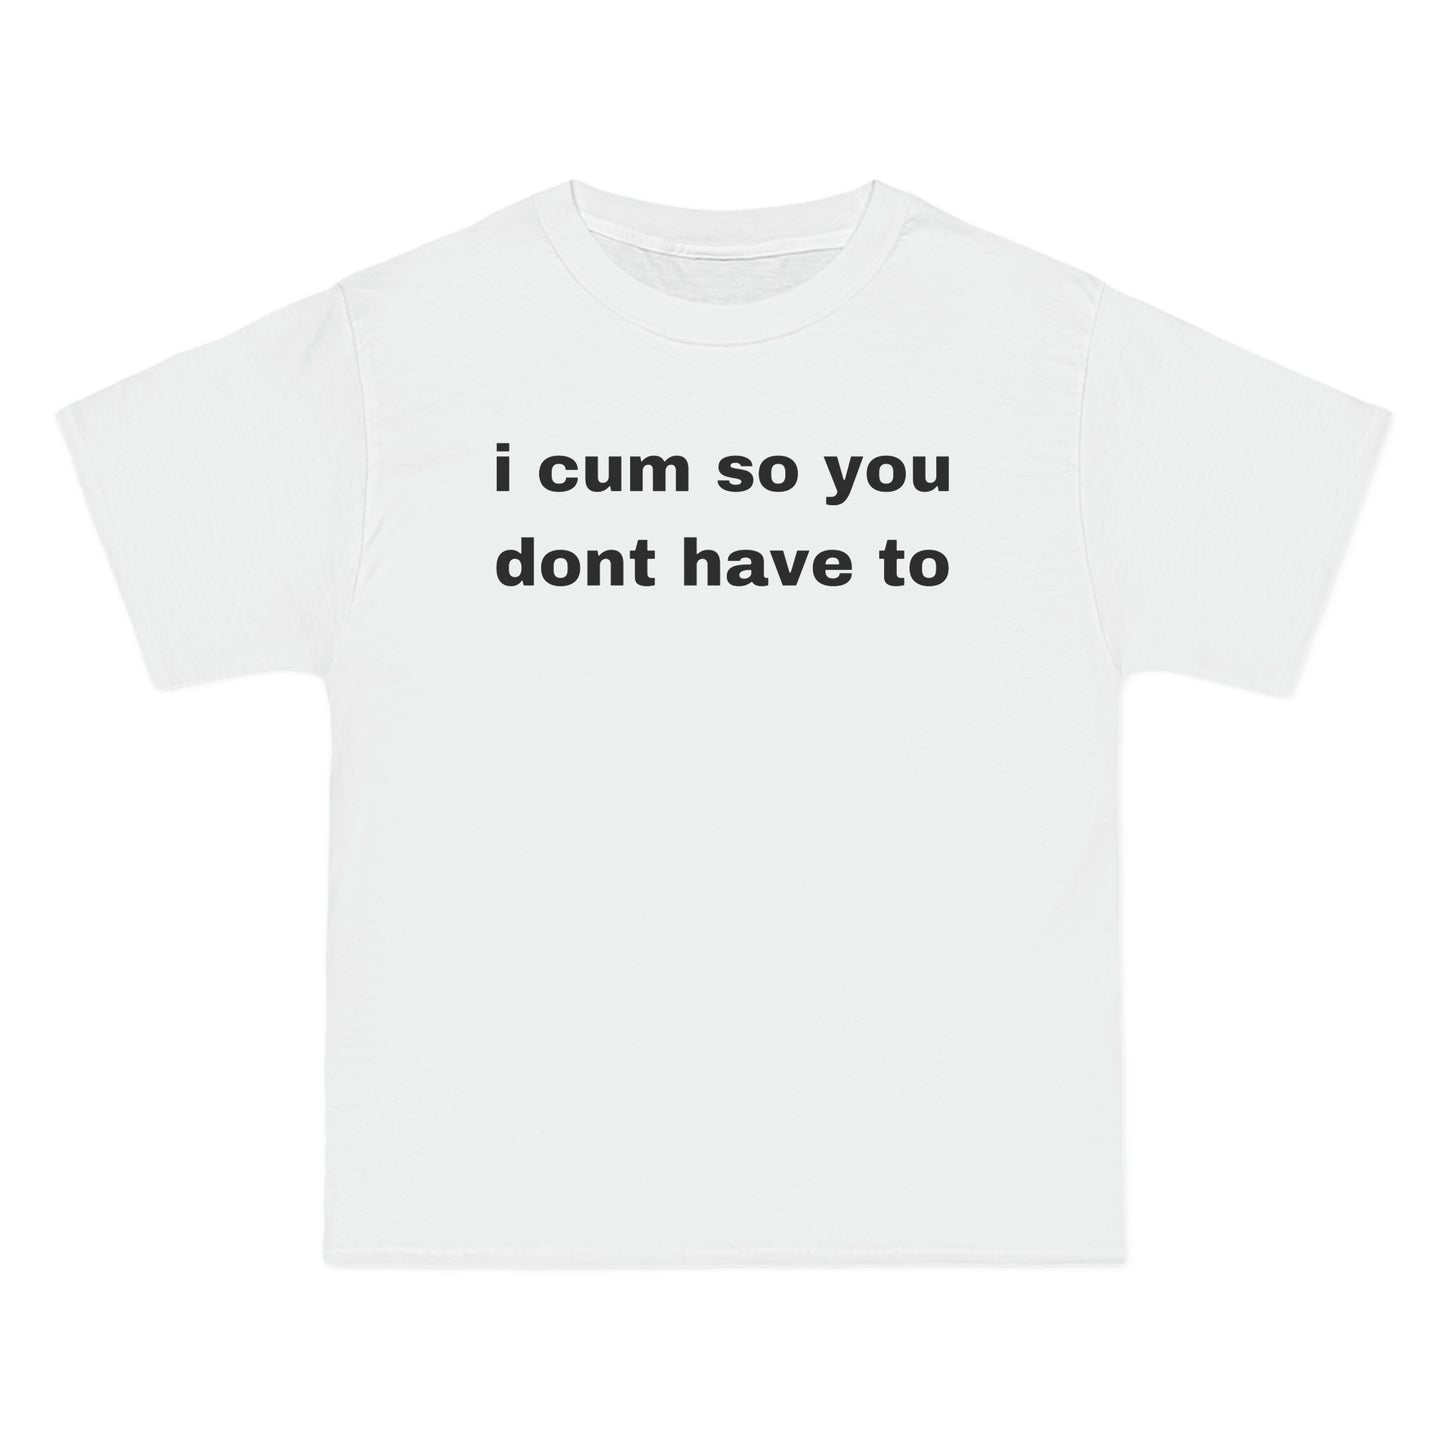 i cum so you dont have to Tee